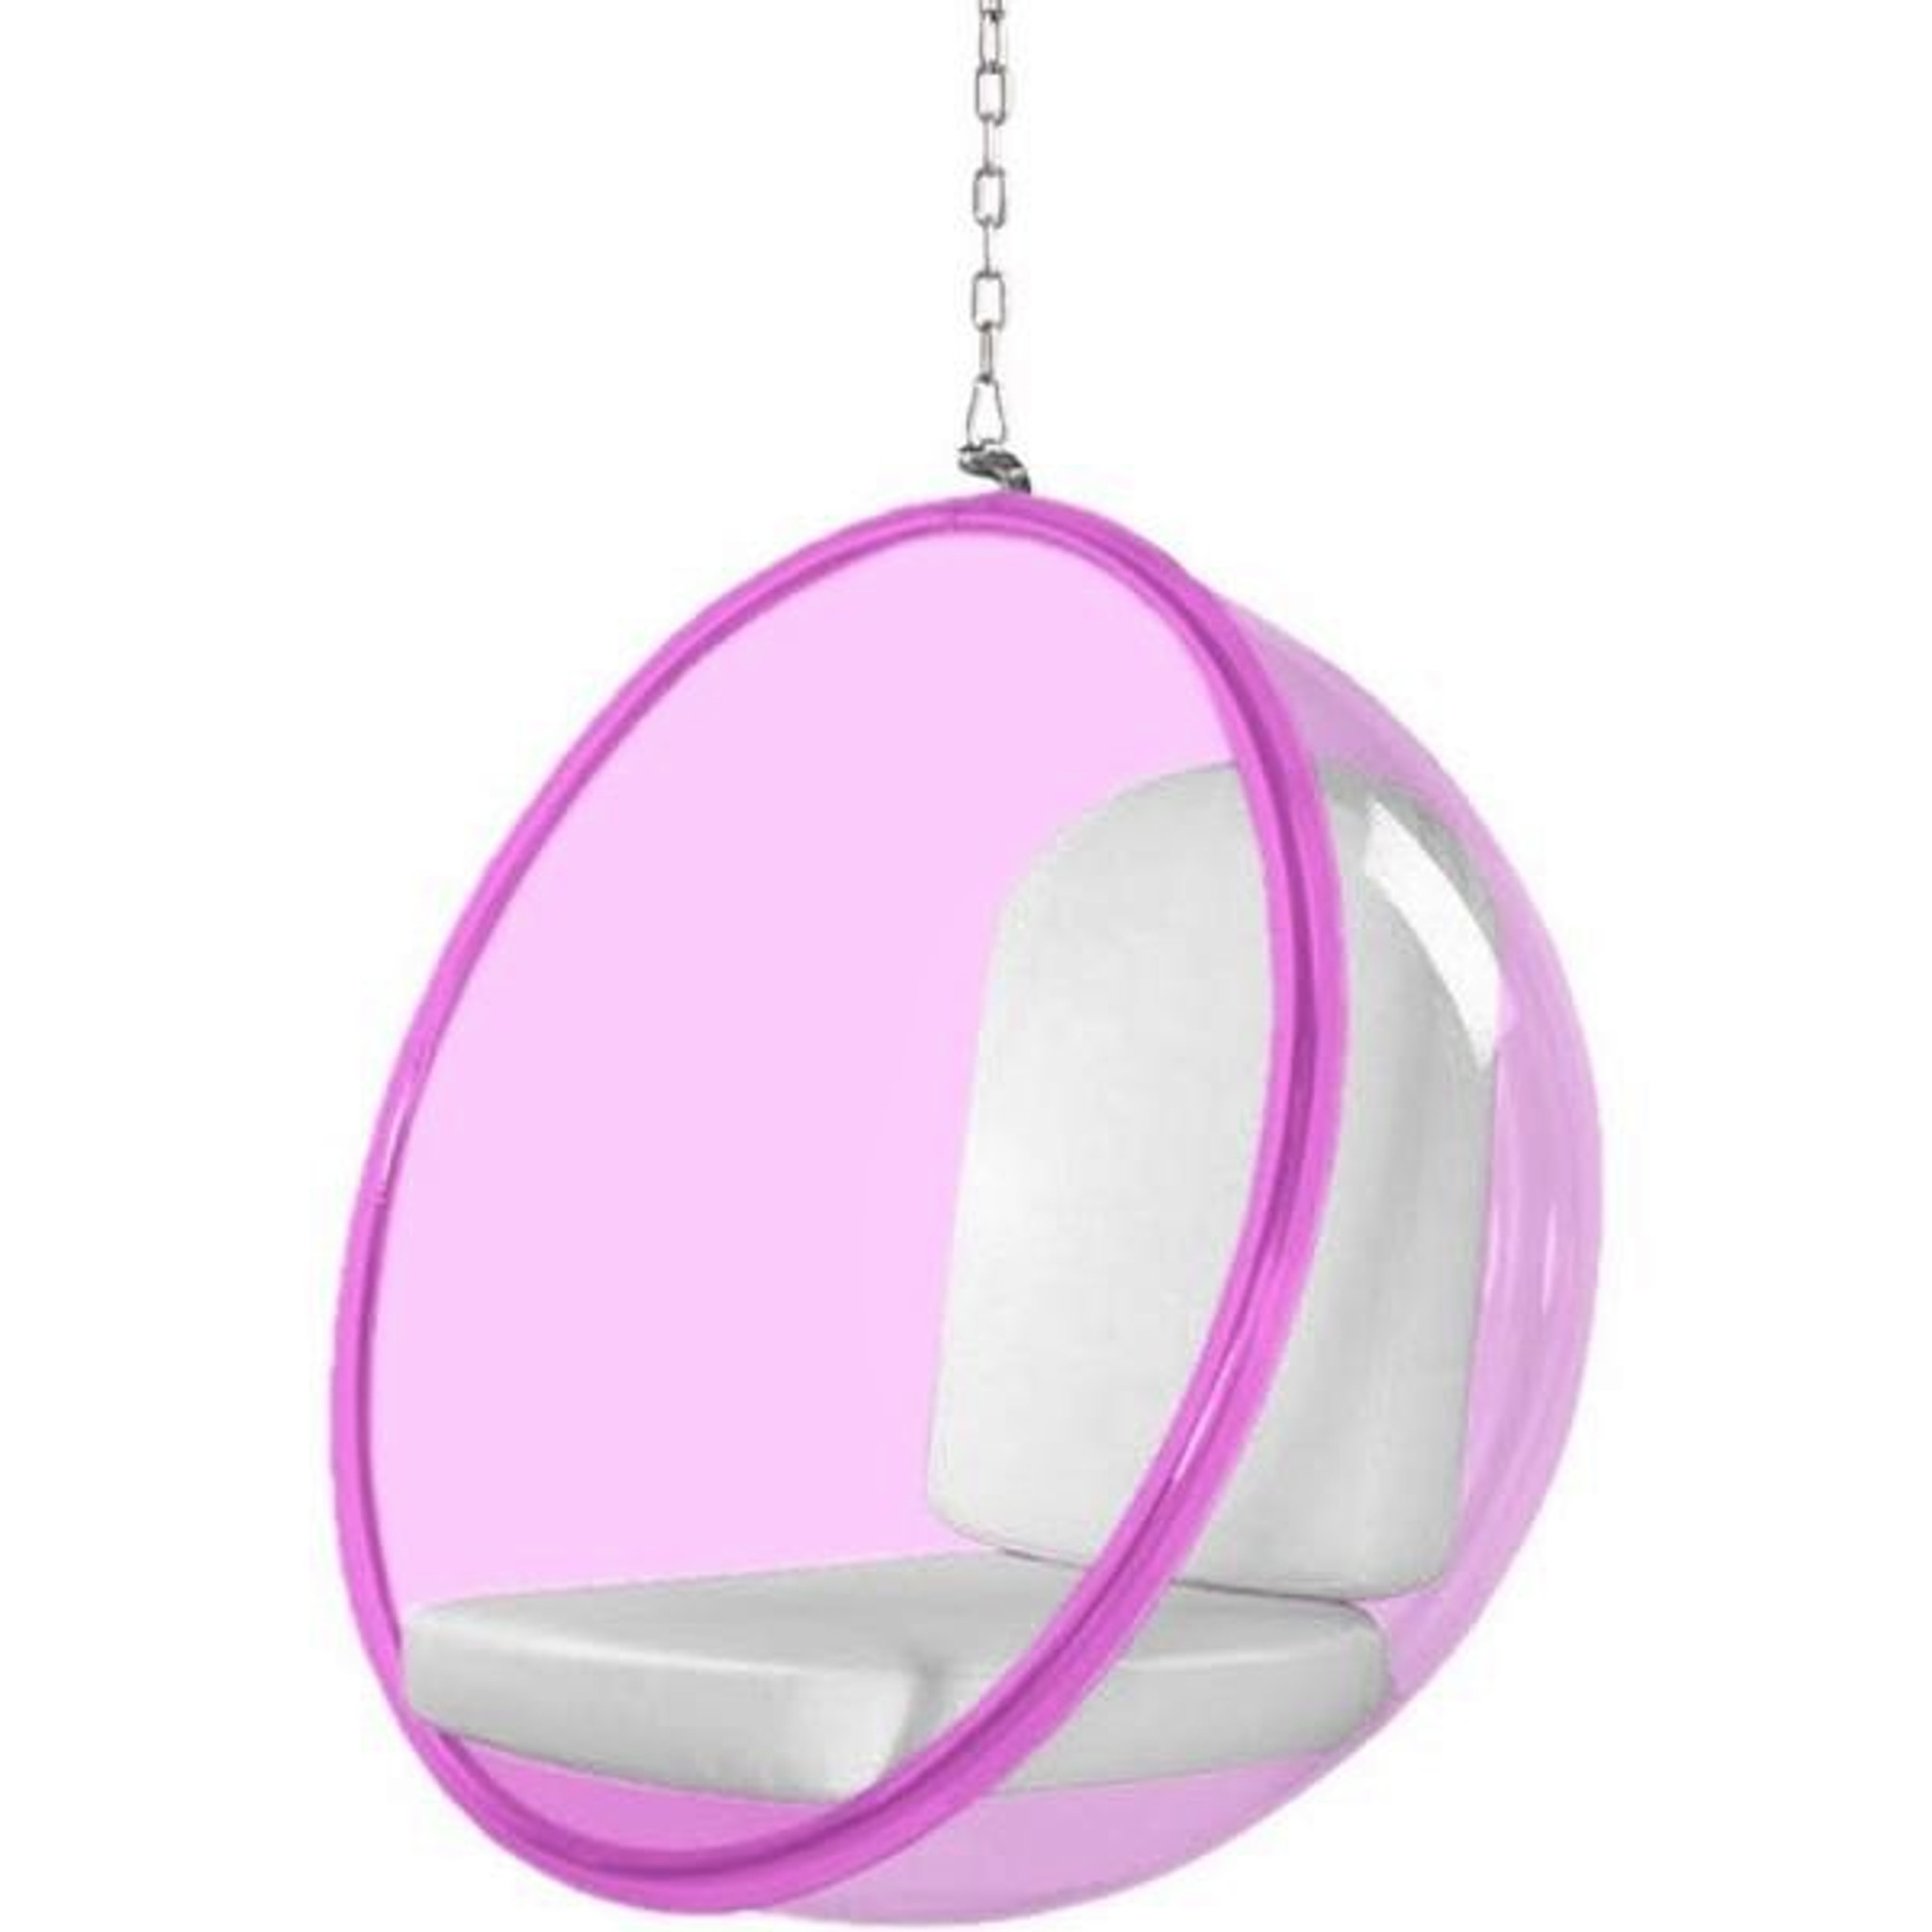 Pink Hanging Acrylic Bubble Chair With White Cushions Clear Home Design